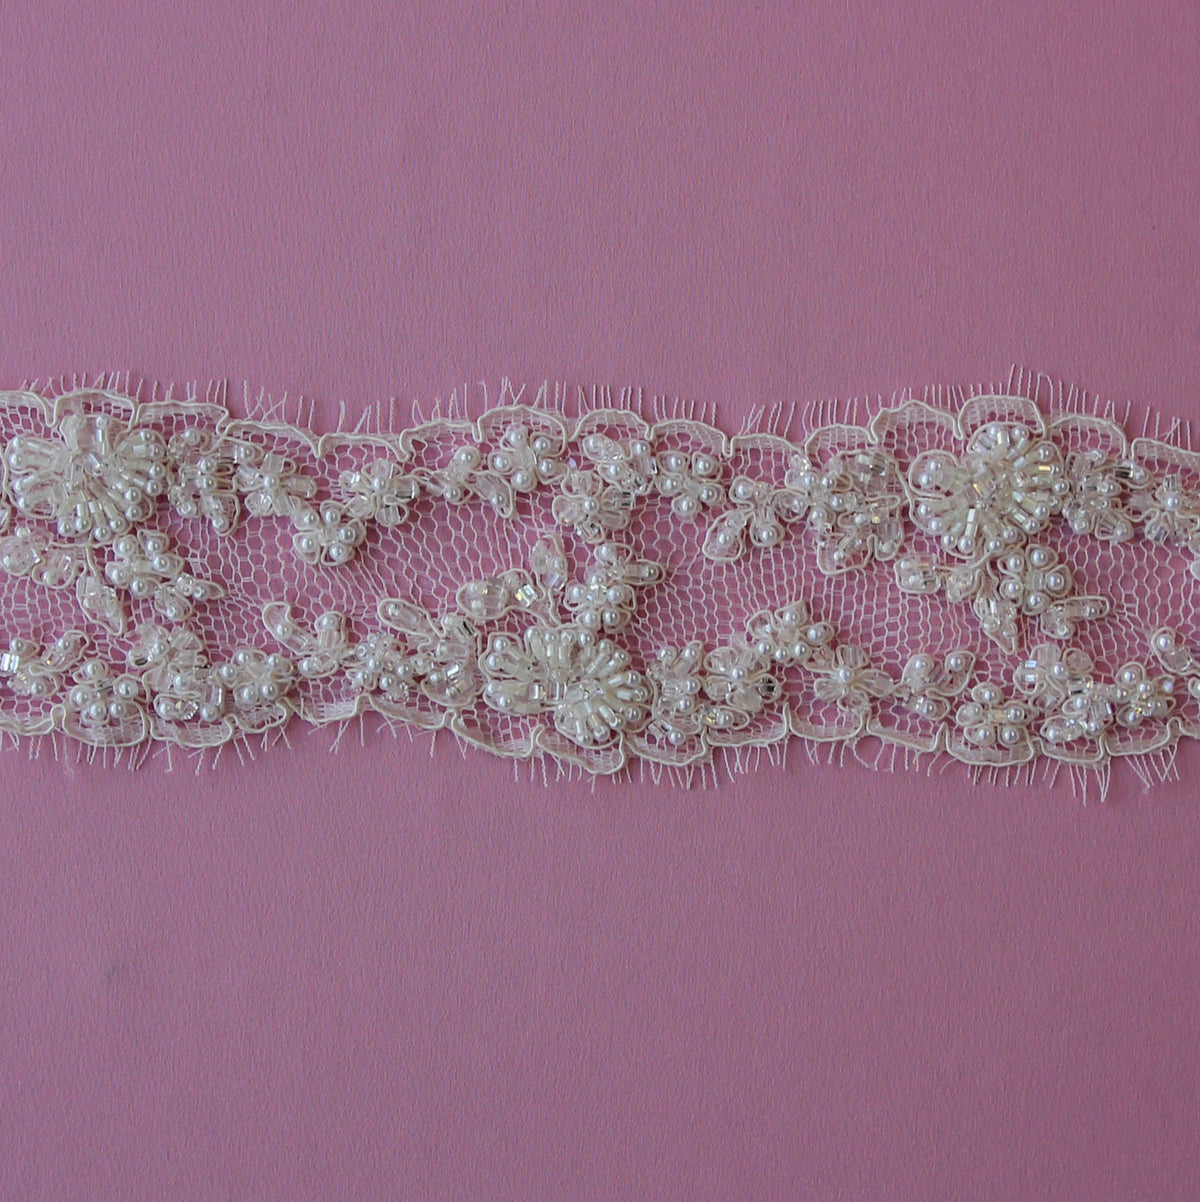 Beaded Lace Trim